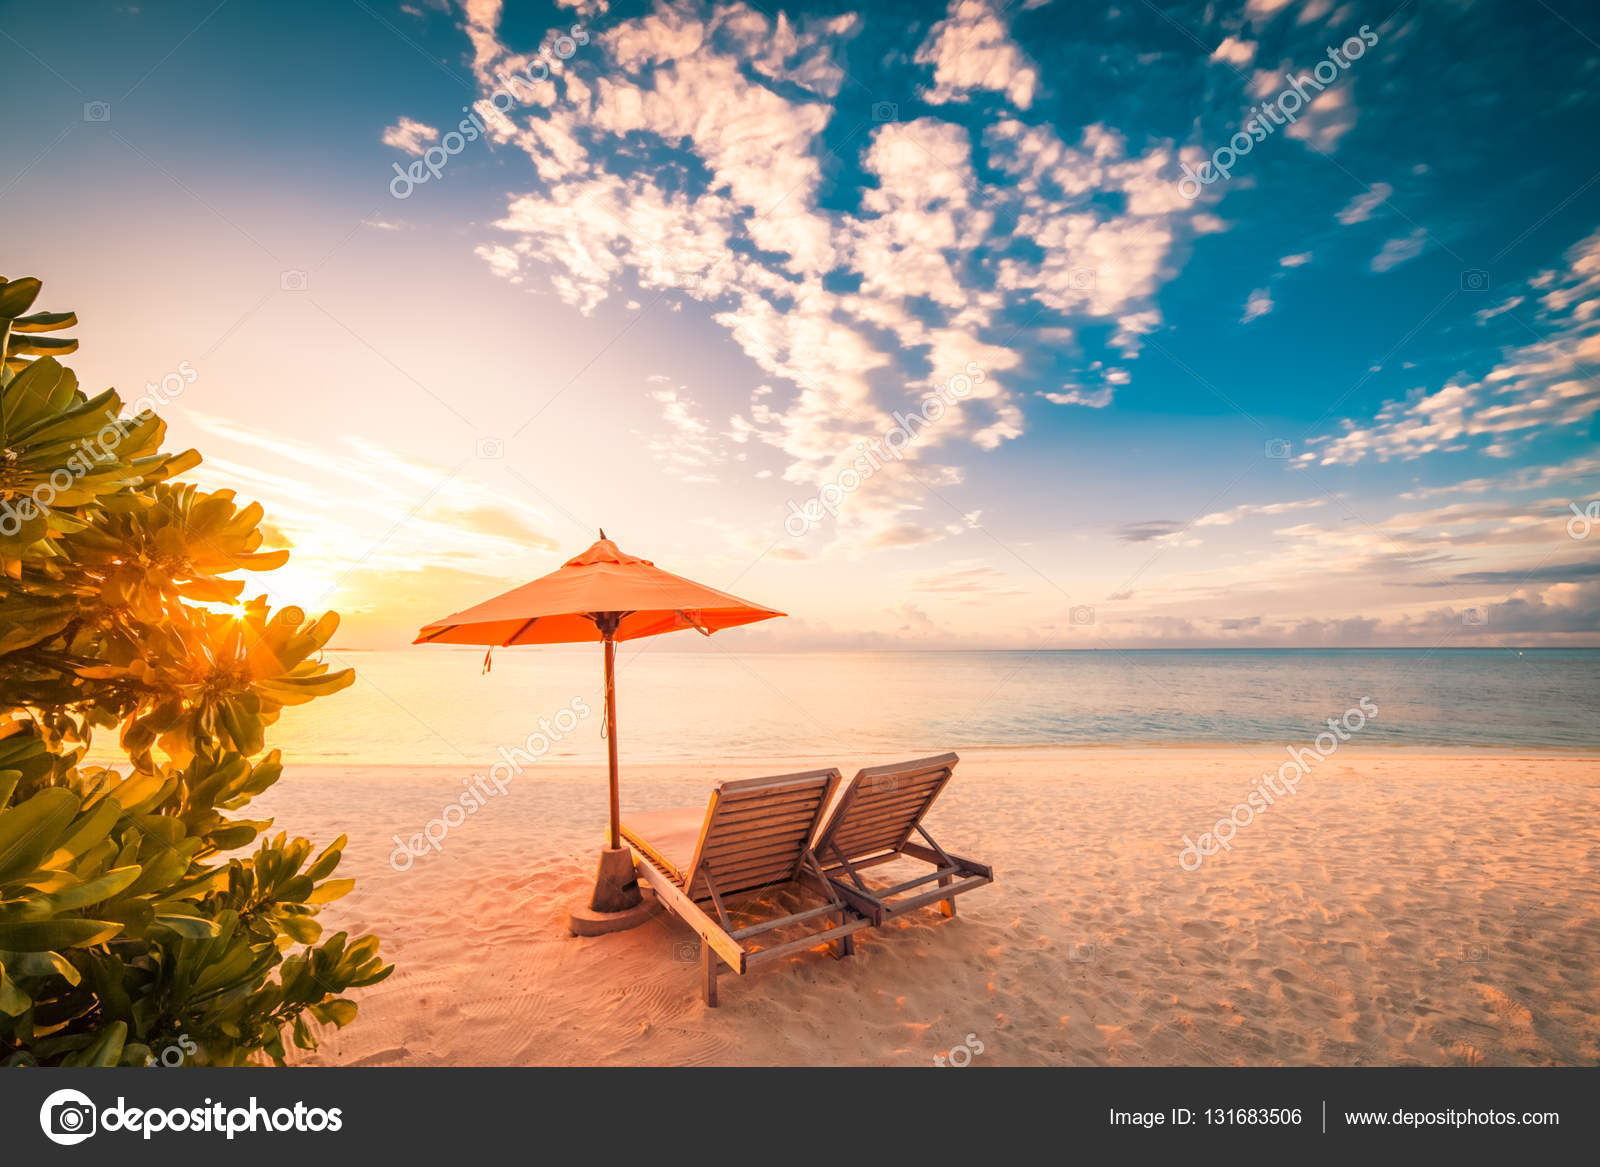 Beautiful Beach Background For Summer Travel With Sun Coconut Tree And Beach Wooden Bed On Sand With Beautiful Blue Sea And Blue Sky Summer Mood Sun Beach Background Concept Stock Photo Image